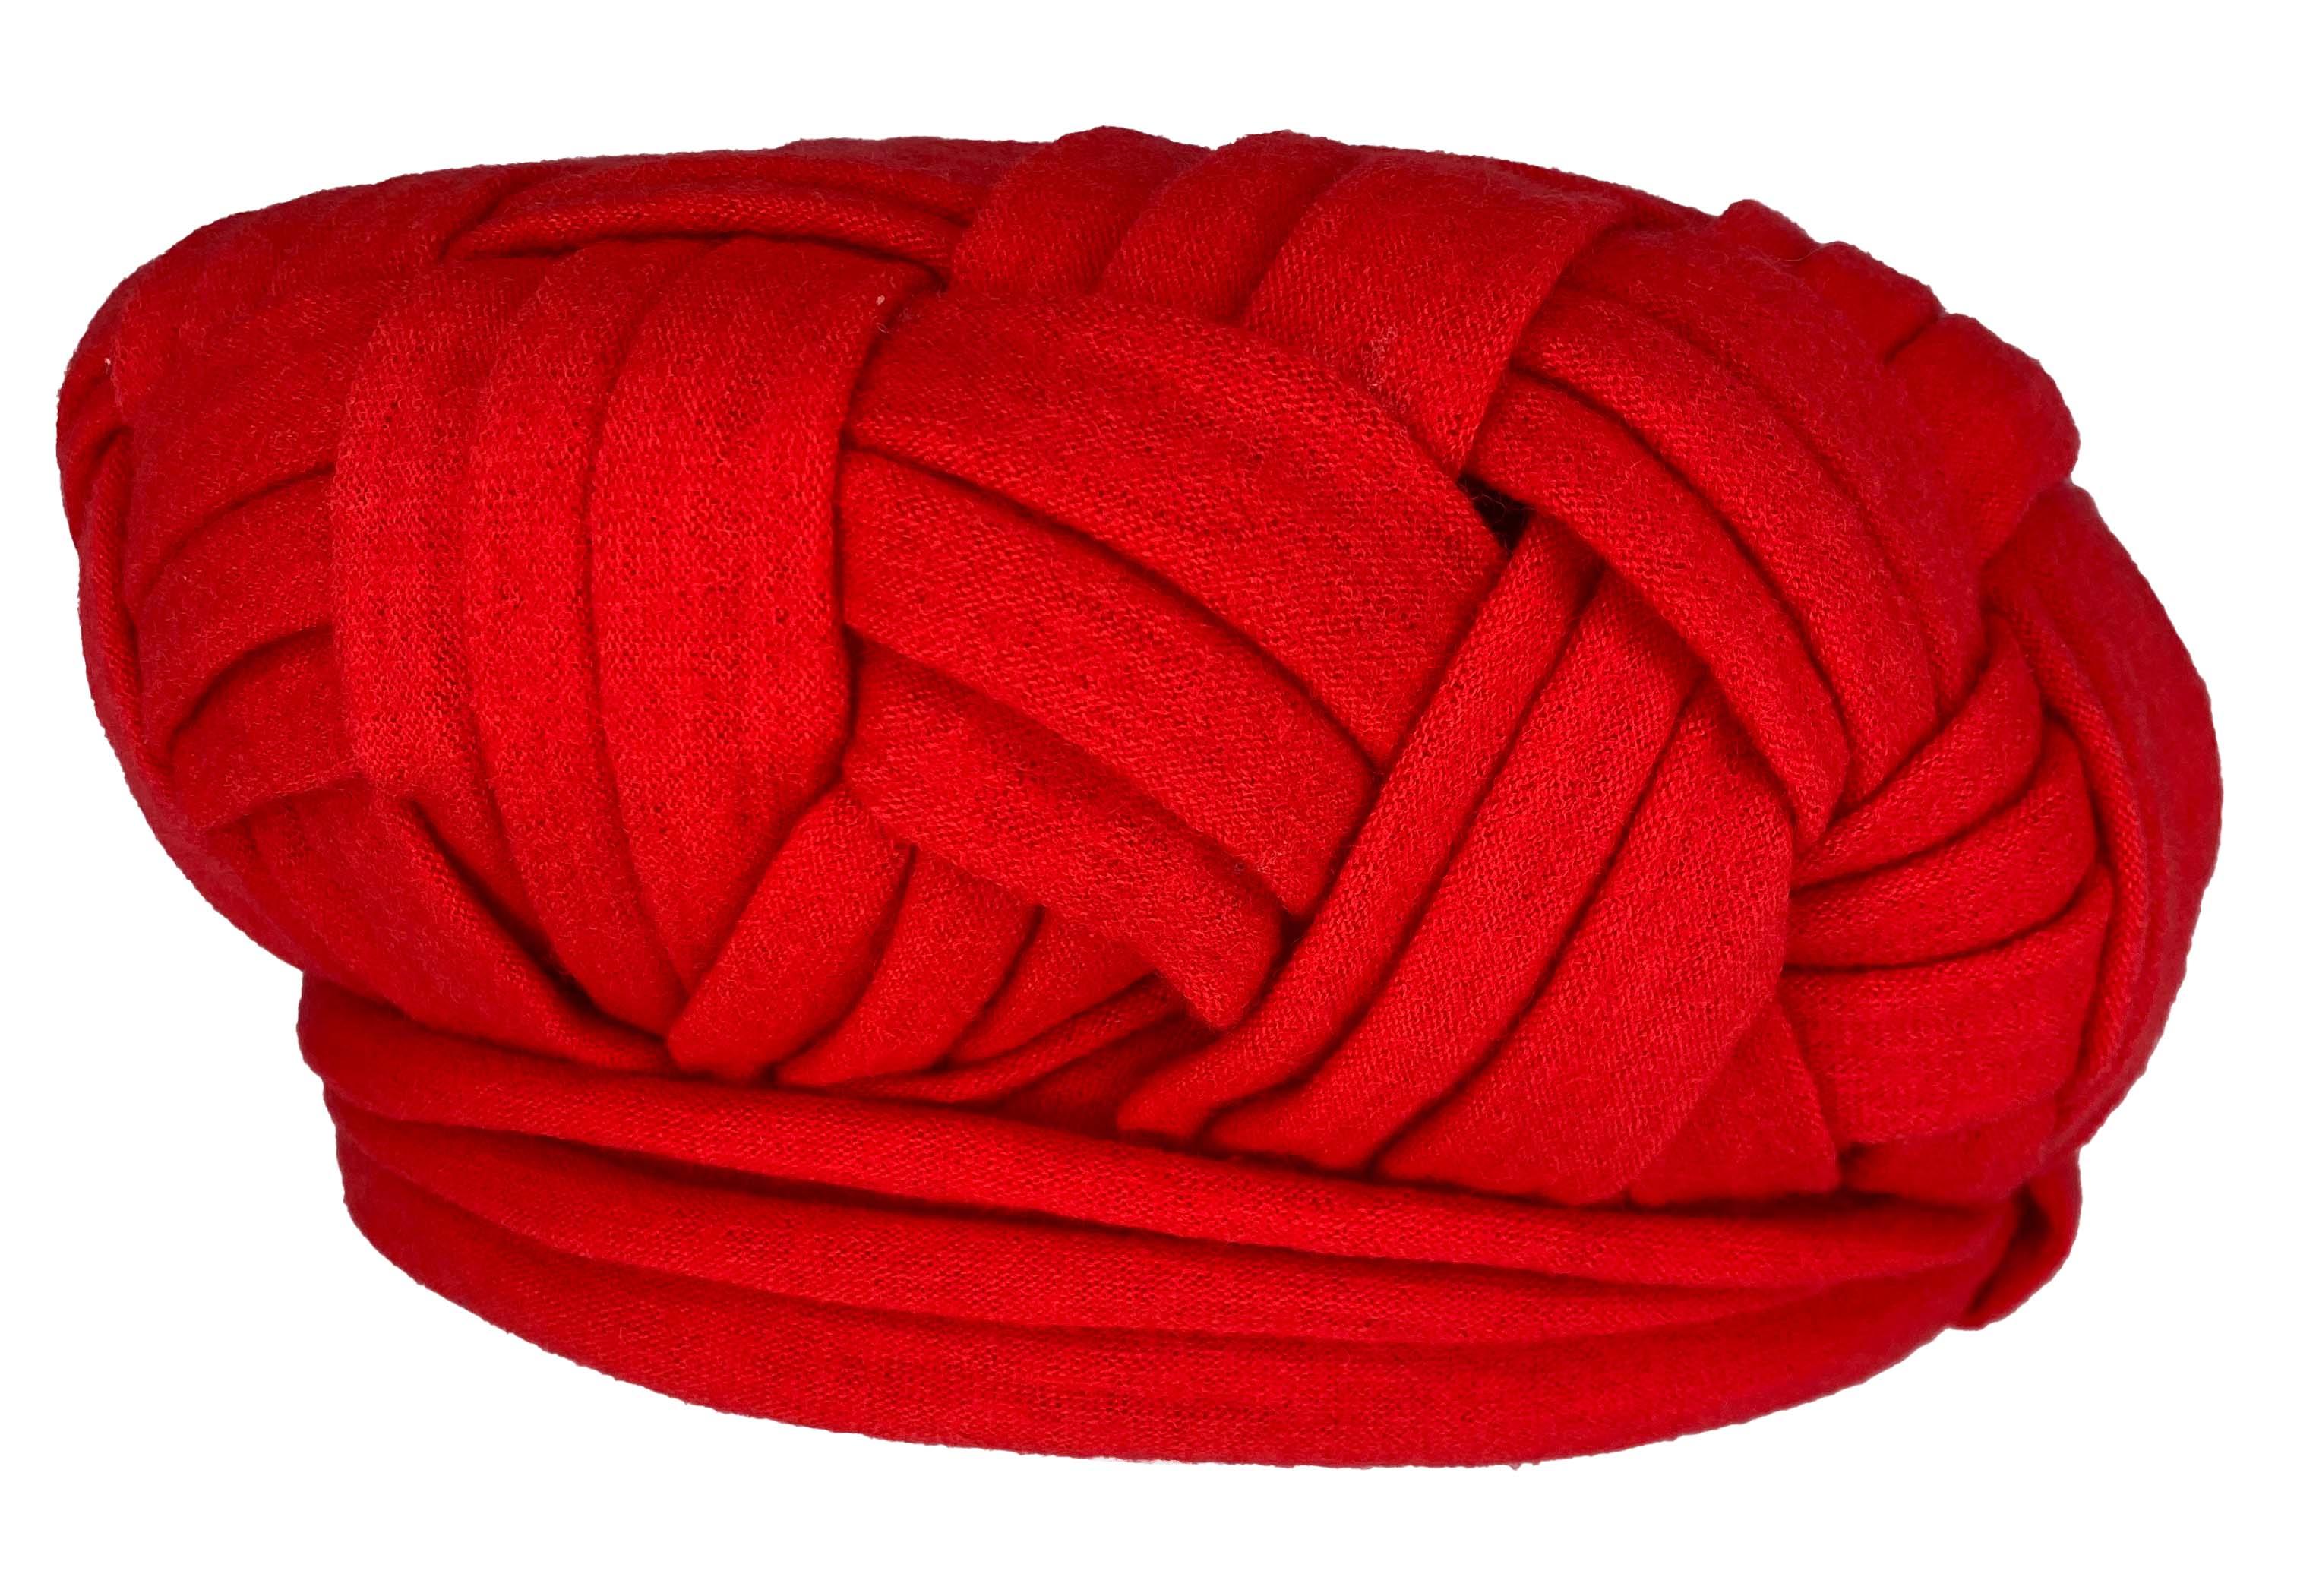 TheRealList presents: a vintage Dior woven hat in red. This piece was designed in the 1960s while the house was under the creative direction of Marc Bohan. A structured take on a beret in soft red fabric. 

Follow us on Instagram! @_the_reallist_